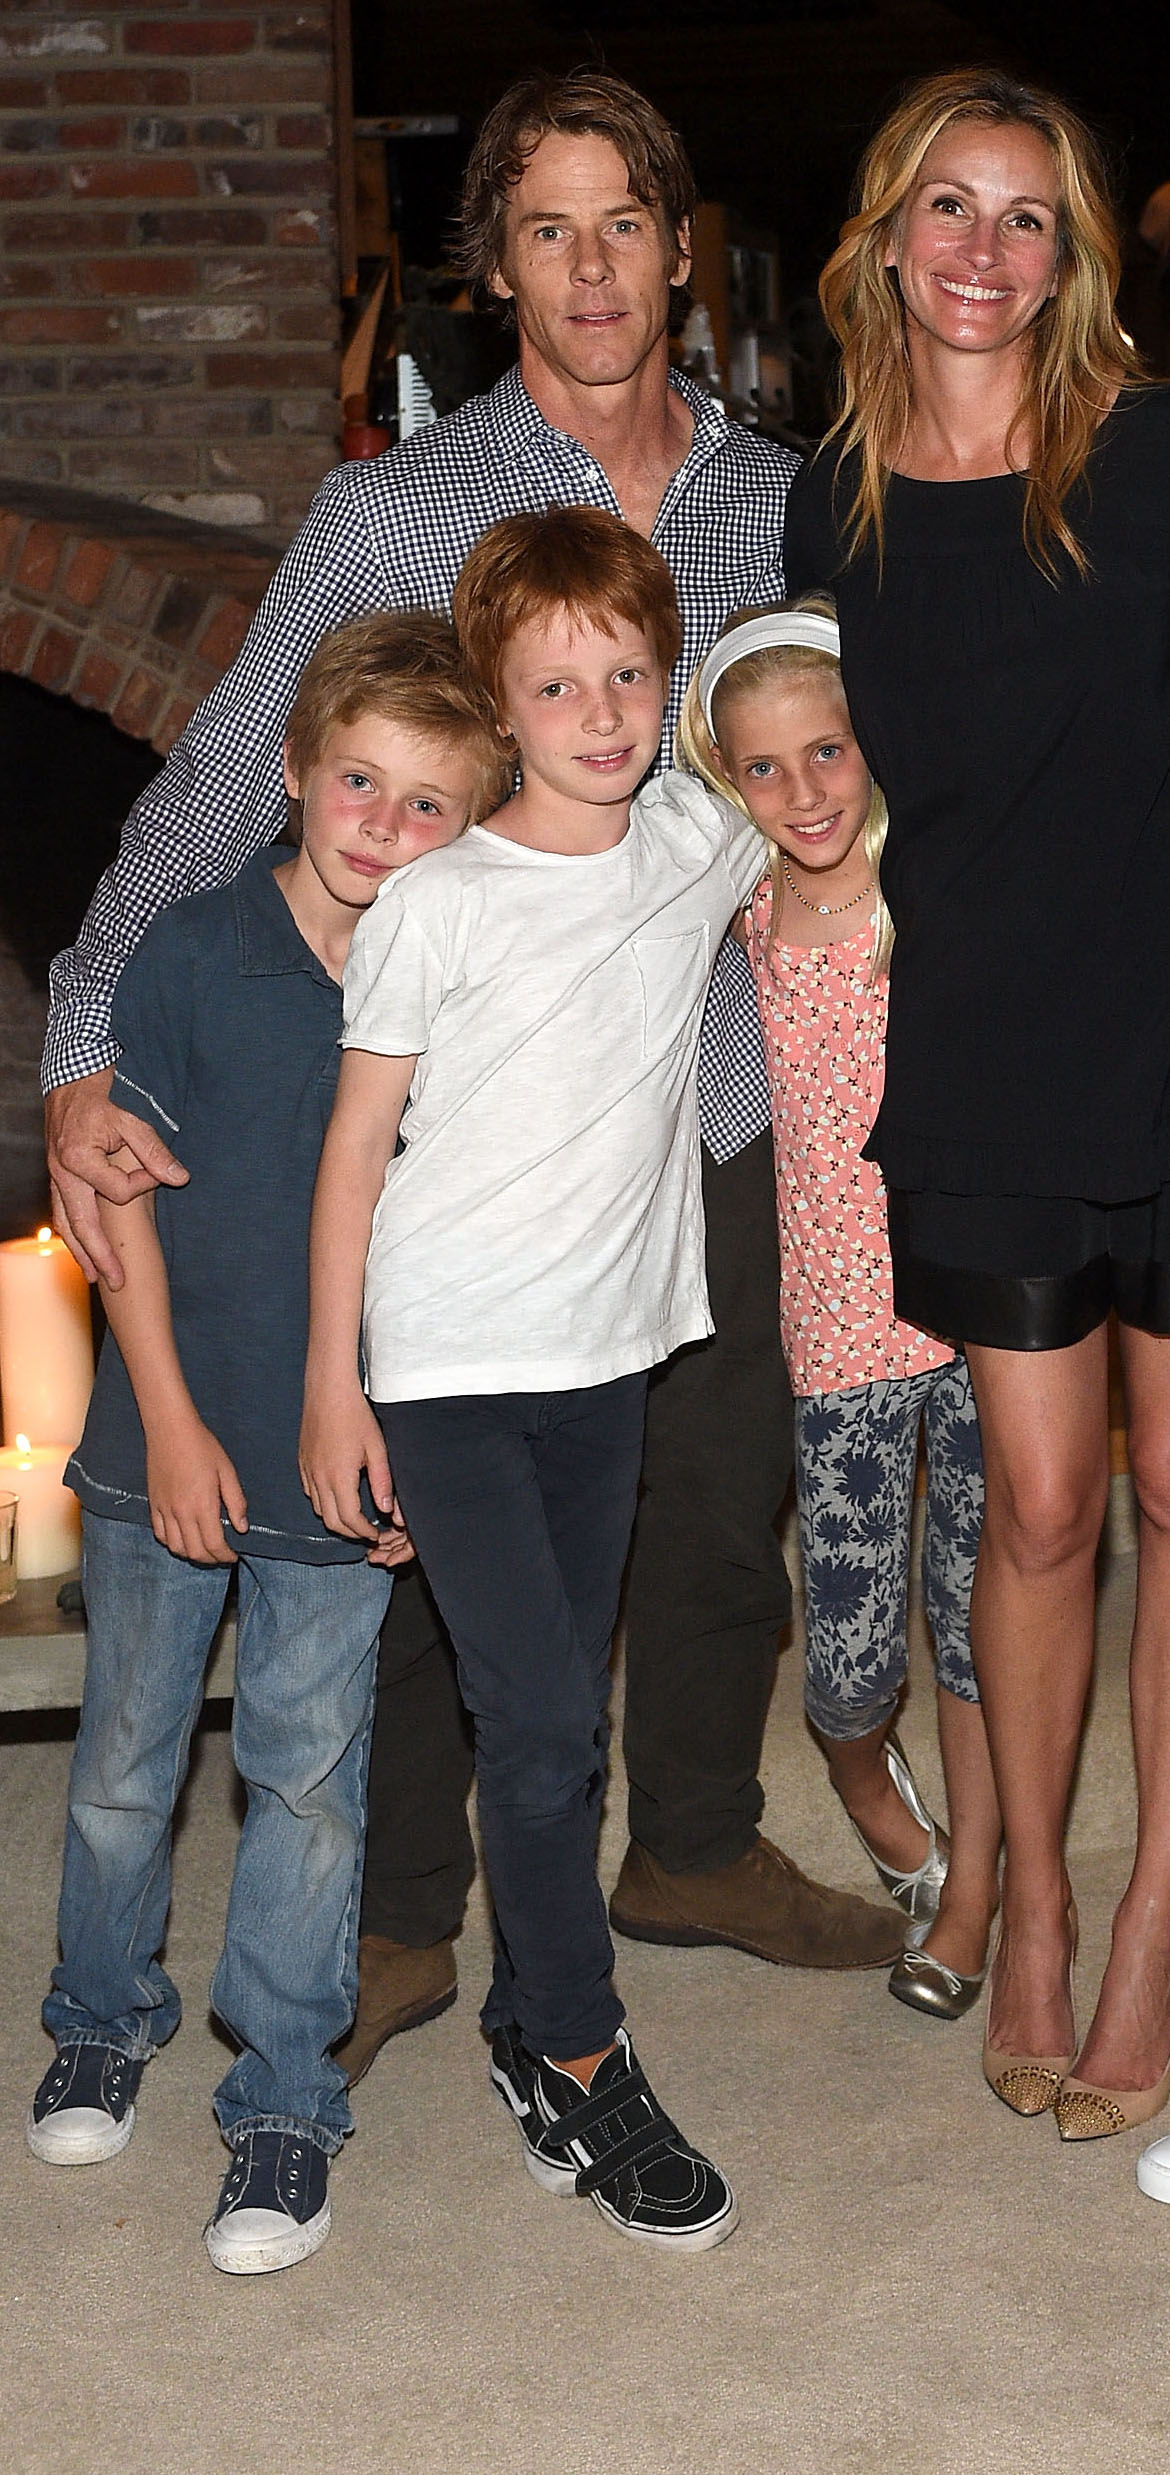 Julia Roberts' Kids Are 'Unaffected' By Her Hollywood Fame (EXCLUSIVE)